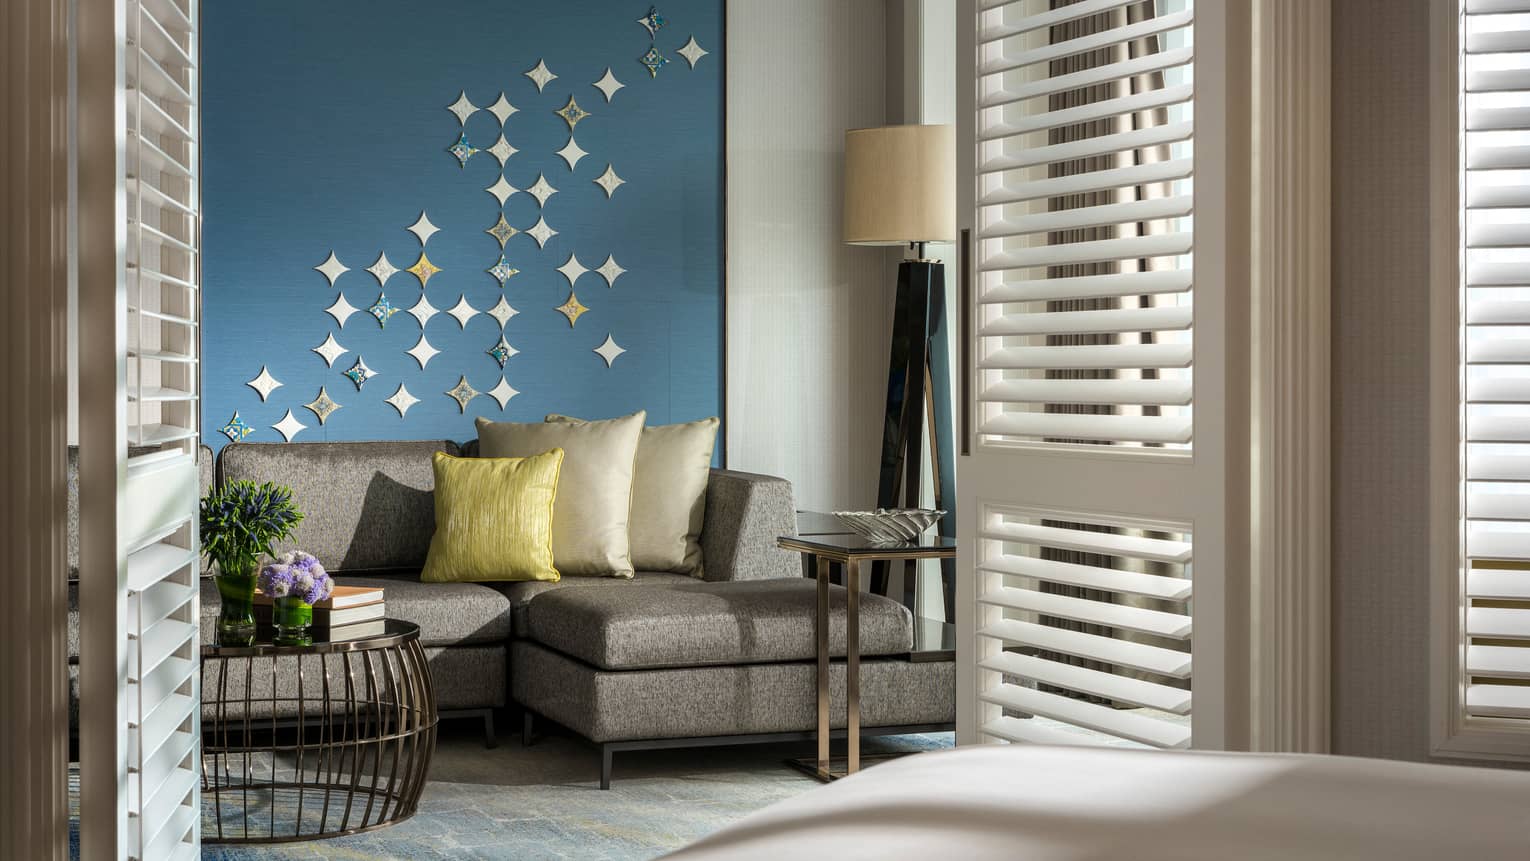 Gold pillows on grey sofa against blue wall with star-shaped Peranakan tile mural